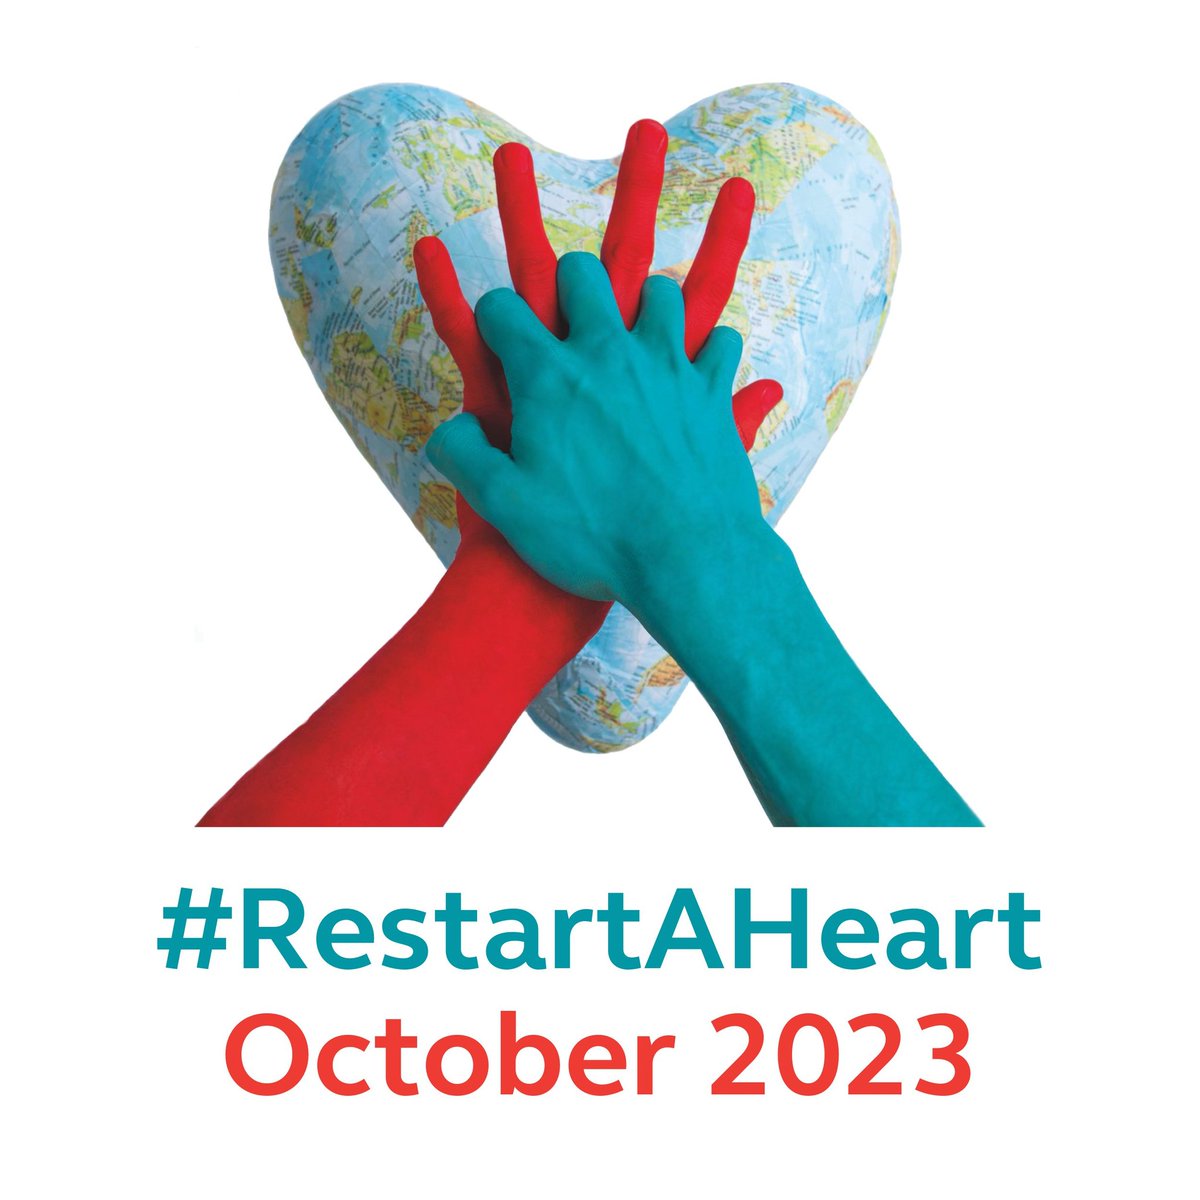 Today is #RestartAHeart day and @BCUNMSkillsSim will be at @bcu South campus and Cuzon teaching BLS. Come and learn a life skill and win a prize. #Resus #BCU #BLS #HandsOn @BCUAdultNursing @BCU_CYPnursing @BCU_LDnursing @BCUMHNTeam @BCUHELS @ResusCouncilUK @DrJamesCant